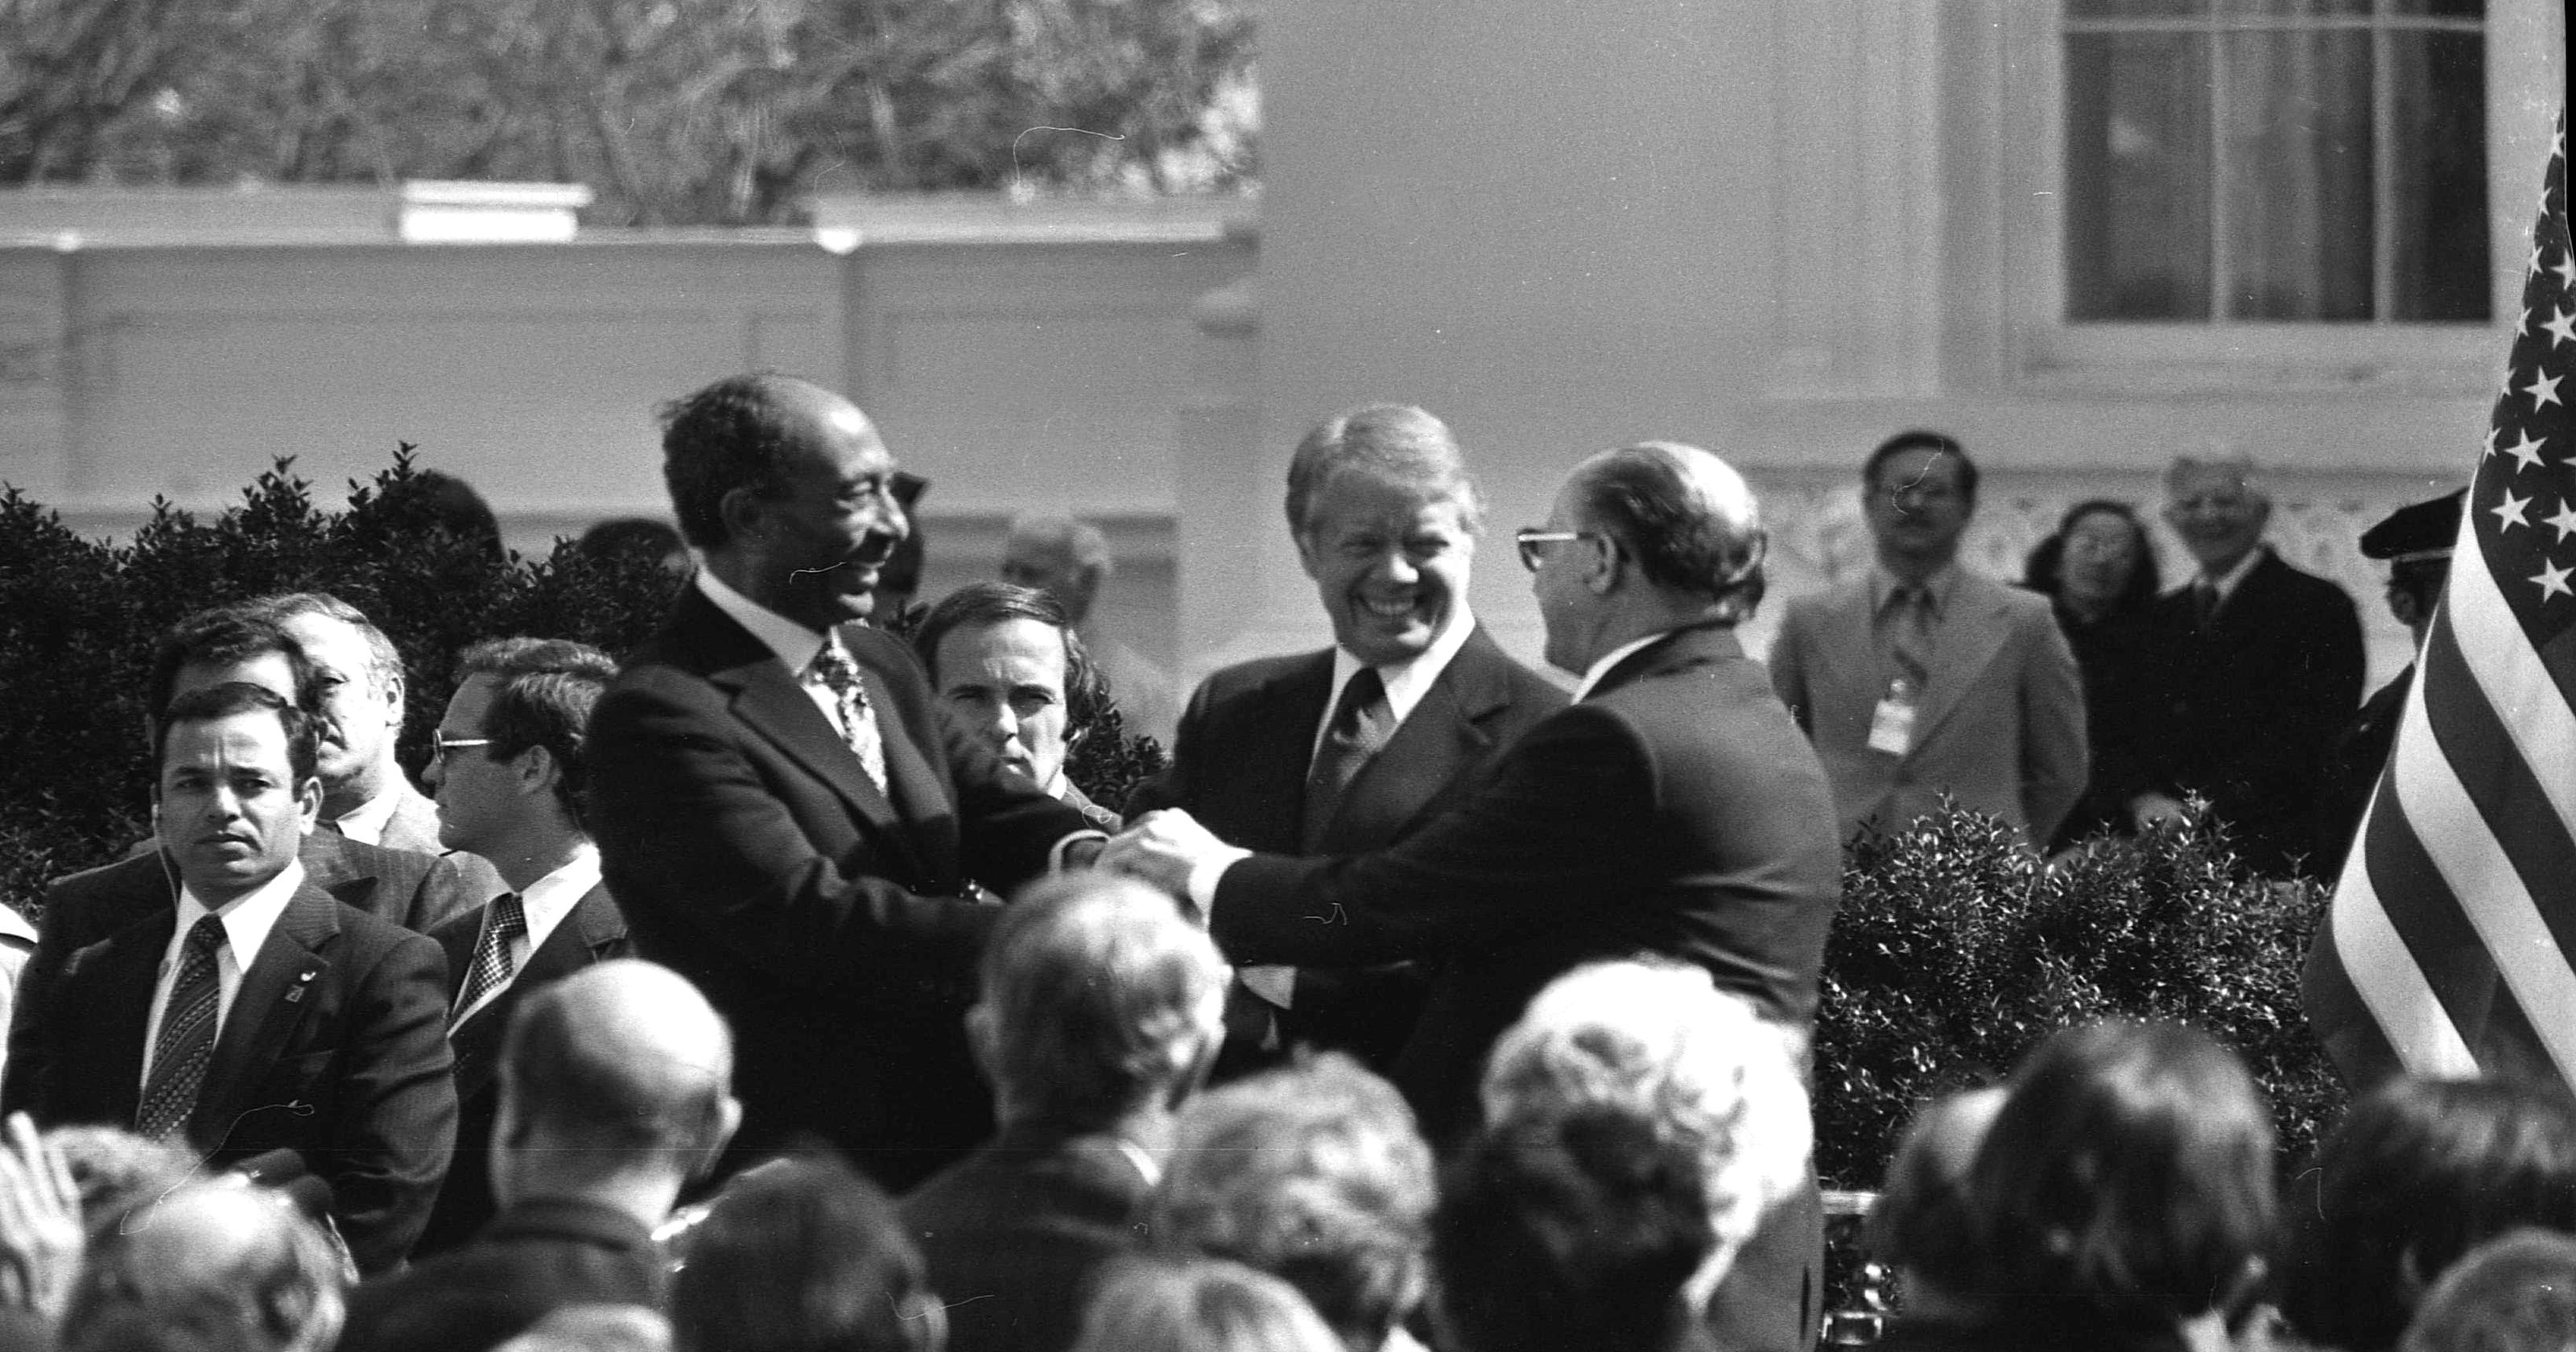 IsraeliEgyptian Peace Treaty photos released for 40th anniversary